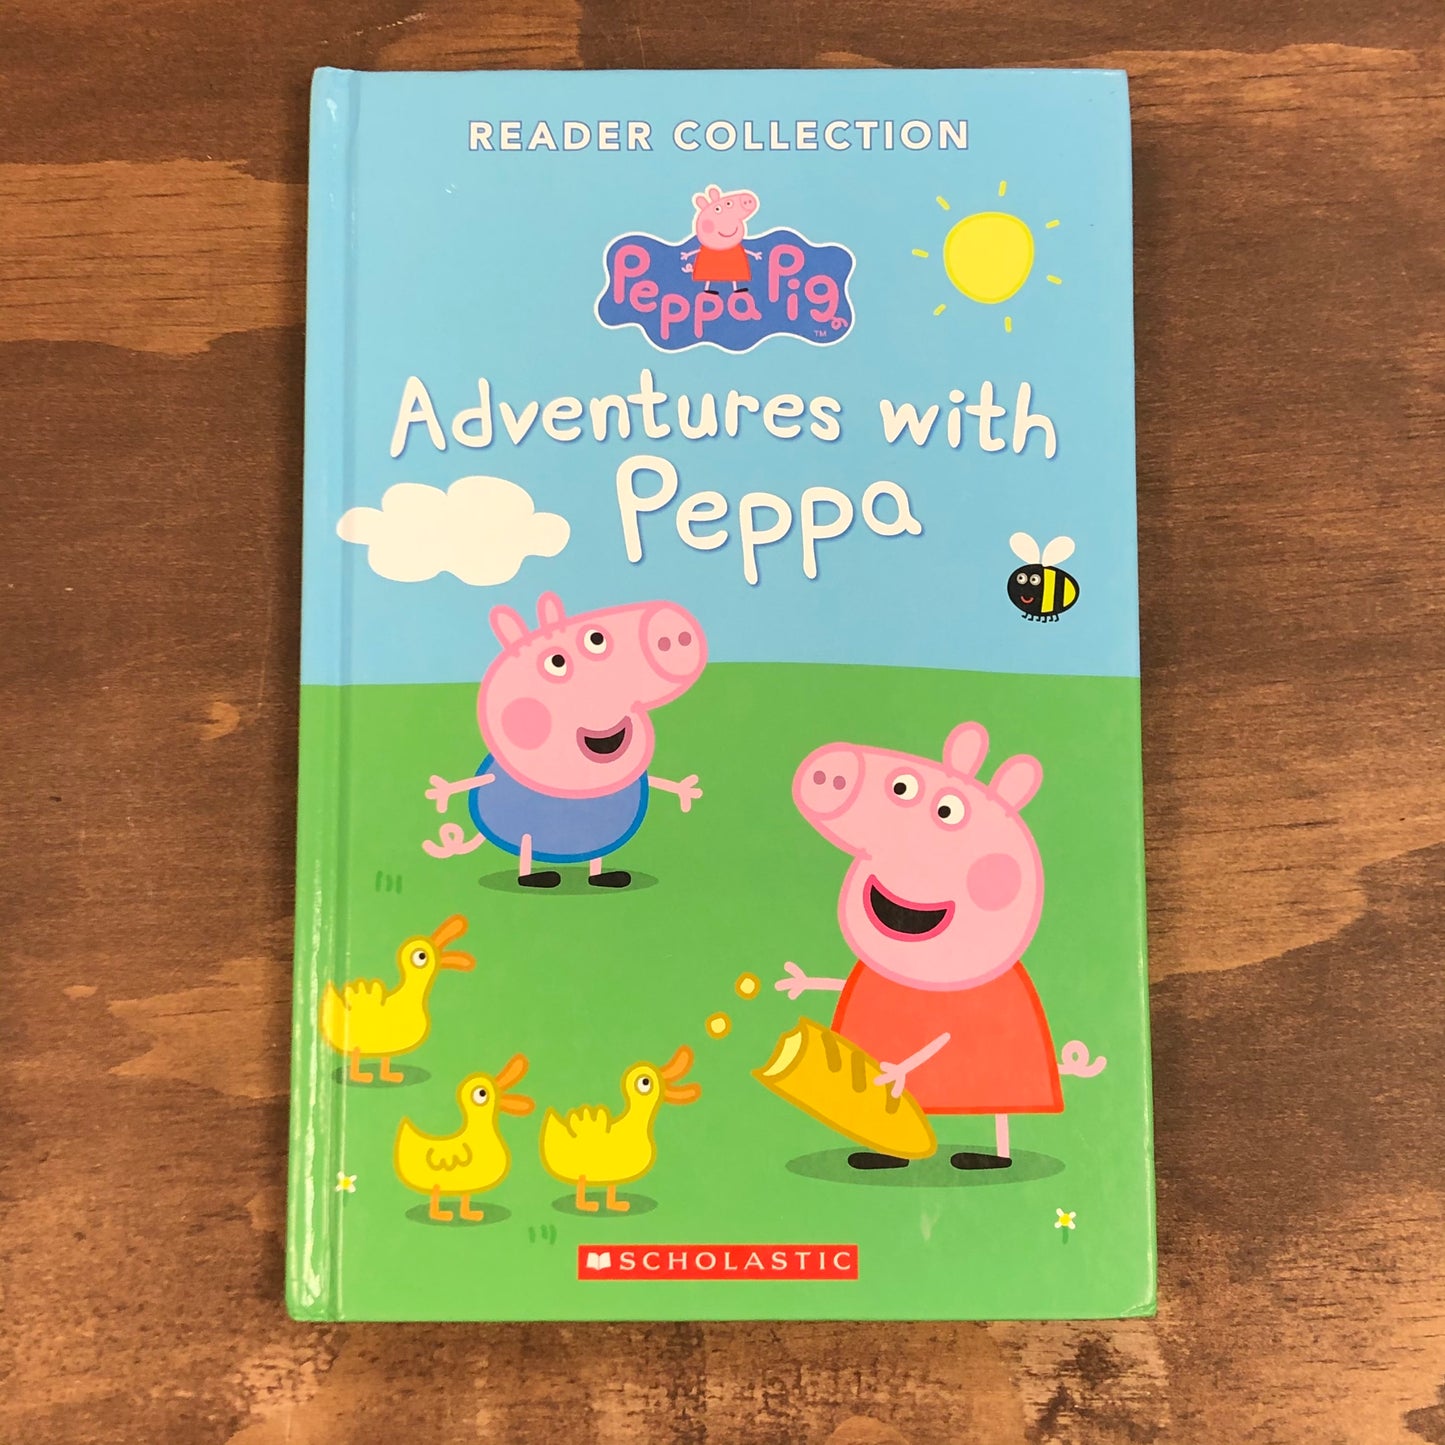 Adventures with Peppa Pig